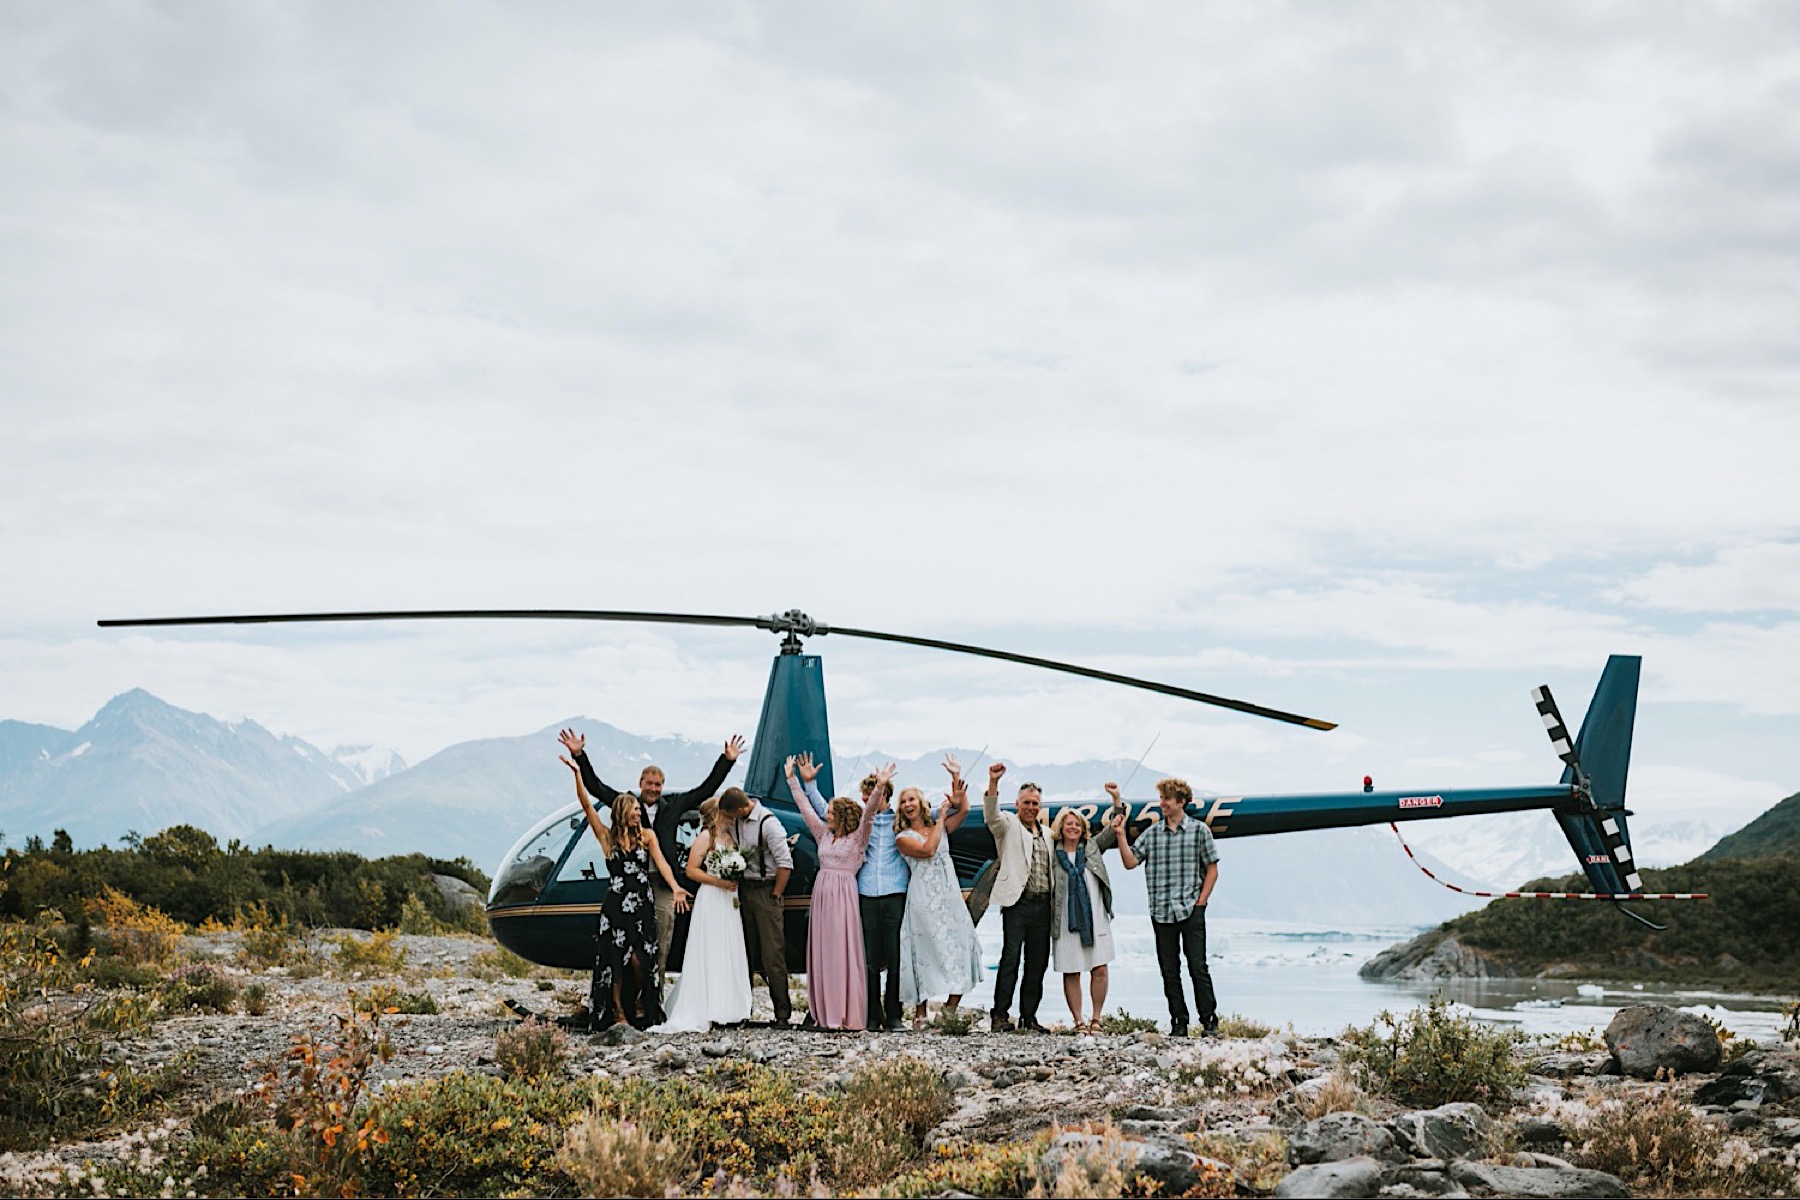 All of bride and grooms guests cheering as they kiss in front of a helicopter